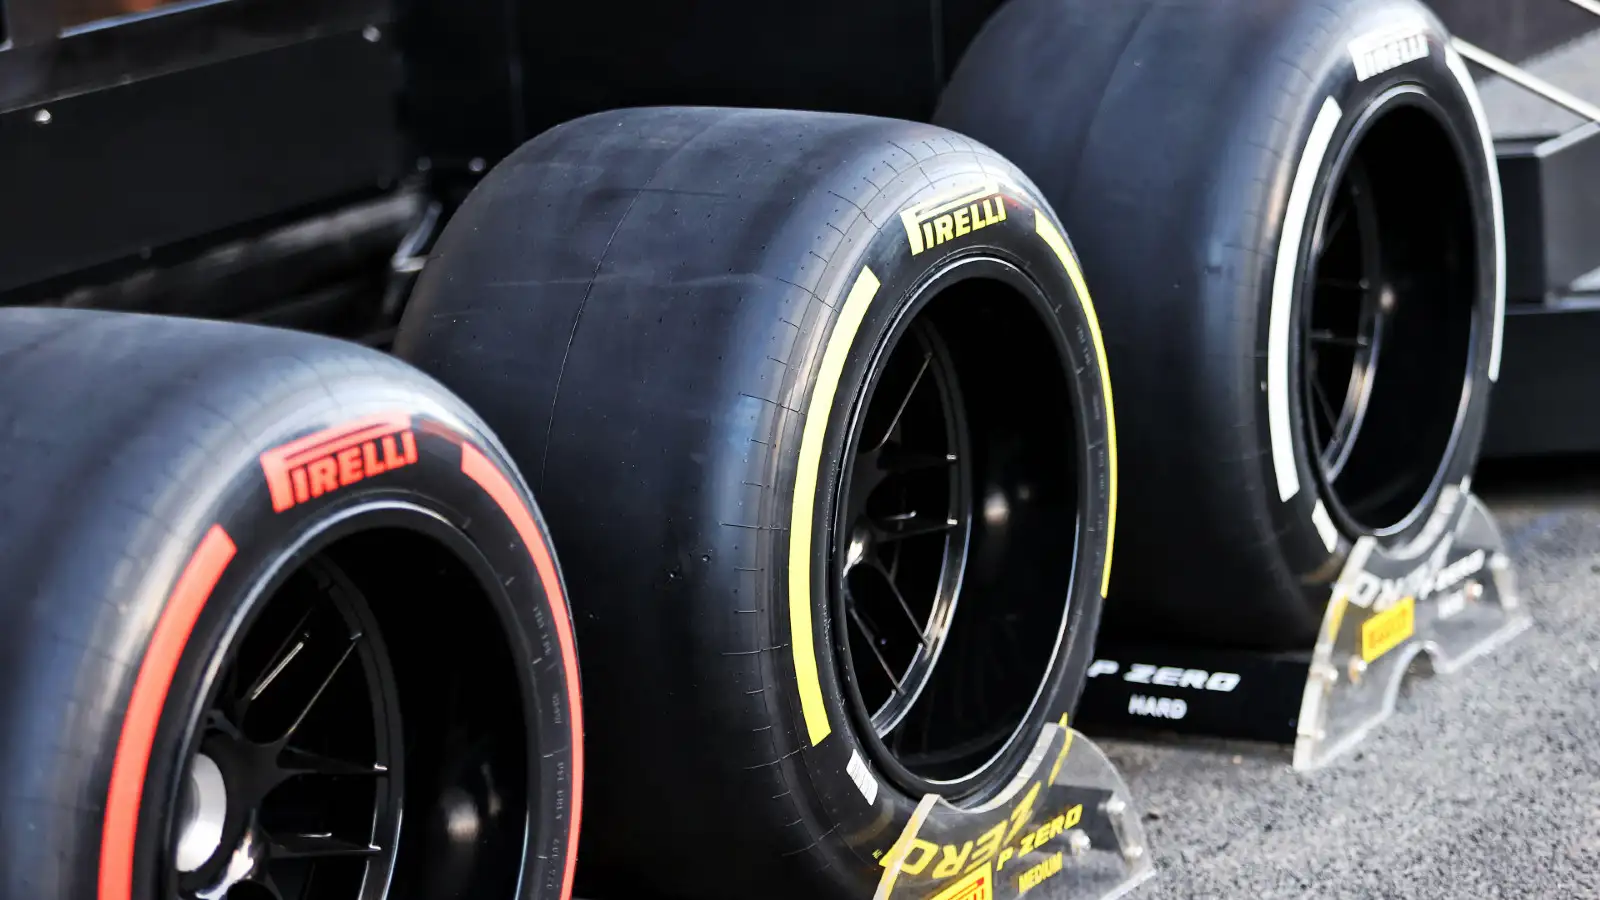 Pirelli tyres lined up at the 2021 Abu Dhabi tyre test. Yas Marina, December 2021.